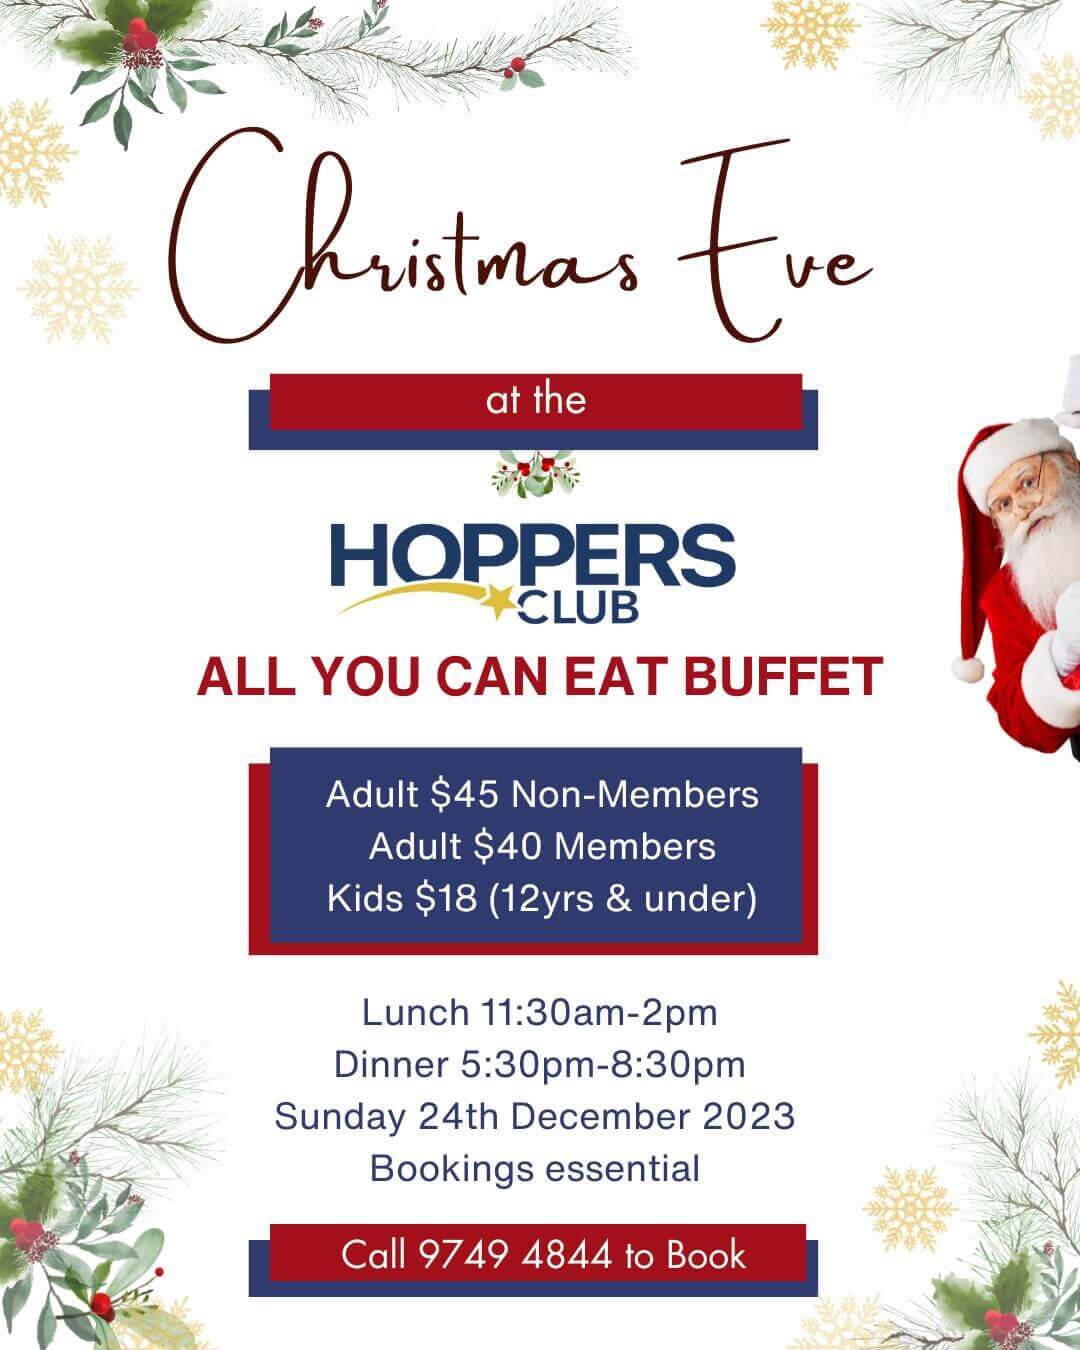 All you can eat Buffet Christmas Eve. Bookings Essential!